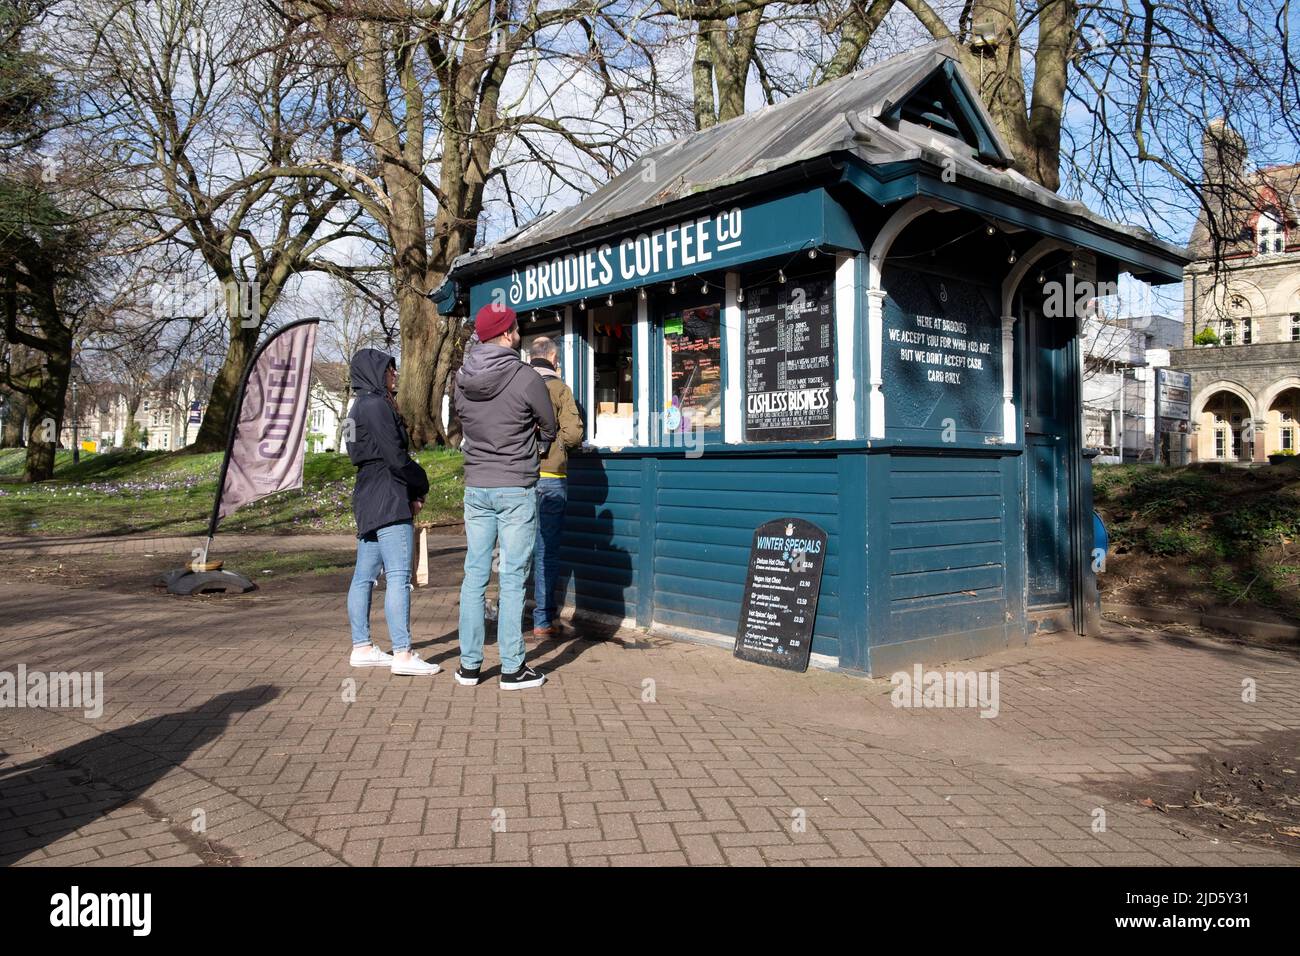 People couple customers queuing for hot drinks at Brodies Coffee Company shed kiosk in Bute Park Cardiff Wales UK KATHY DEWITT Stock Photo